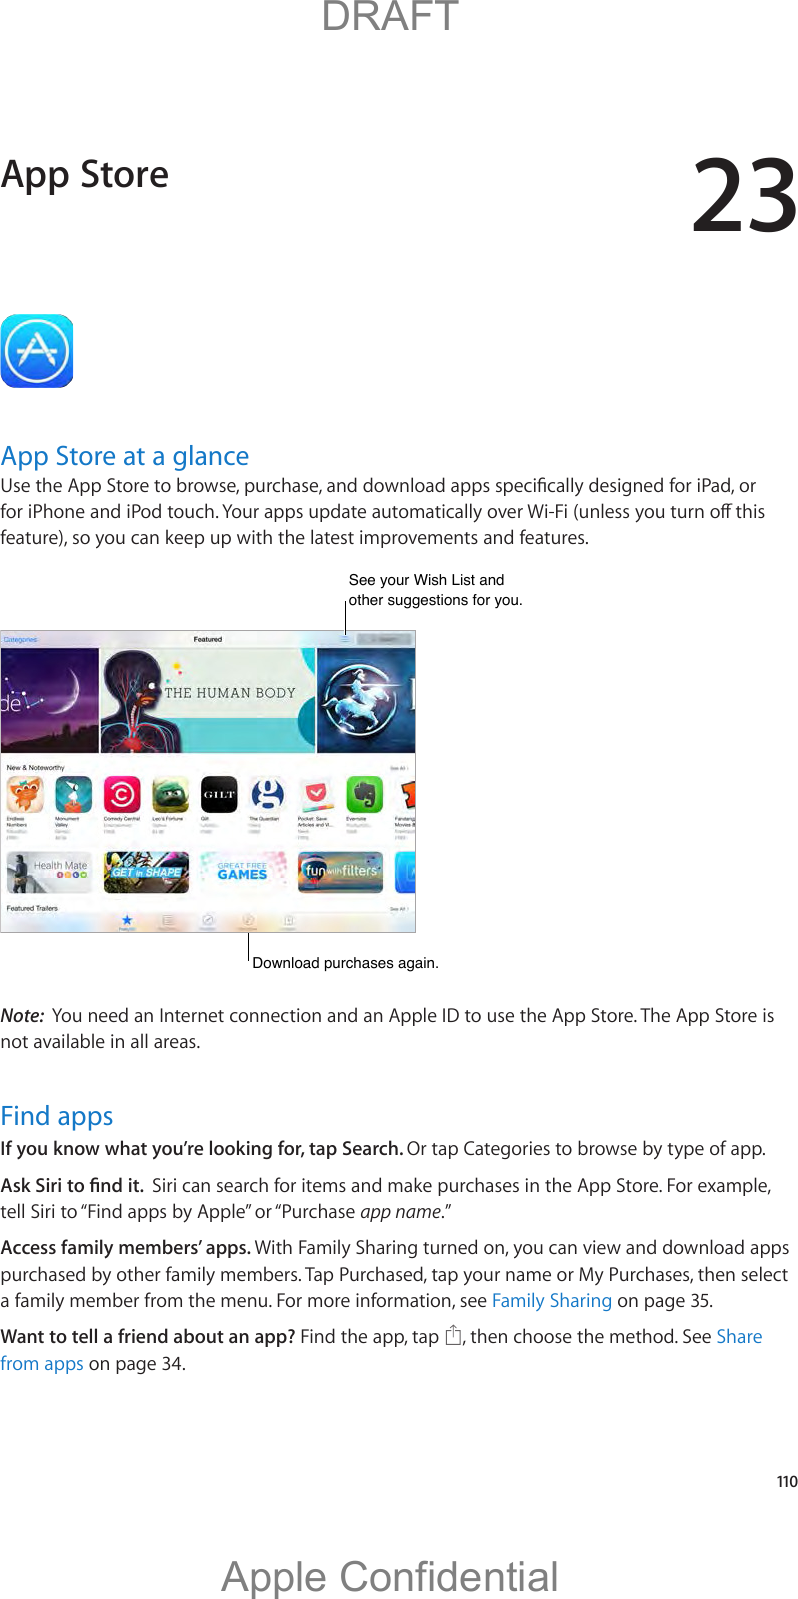 23   110App Store at a glance7UGVJG#RR5VQTGVQDTQYUGRWTEJCUGCPFFQYPNQCFCRRUURGEK°ECNN[FGUKIPGFHQTK2CFQTHQTK2JQPGCPFK2QFVQWEJ;QWTCRRUWRFCVGCWVQOCVKECNN[QXGT9K(KWPNGUU[QWVWTPQÒVJKUfeature), so you can keep up with the latest improvements and features.See your Wish List and other suggestions for you.See your Wish List and other suggestions for you.Download purchases again.Download purchases again.Note:  You need an Internet connection and an Apple ID to use the App Store. The App Store is not available in all areas.Find appsIf you know what you’re looking for, tap Search. Or tap Categories to browse by type of app.#UM5KTKVQ°PFKVSiri can search for items and make purchases in the App Store. For example, tell Siri to “Find apps by Apple” or “Purchase app name.”Access family members’ apps. With Family Sharing turned on, you can view and download apps purchased by other family members. Tap Purchased, tap your name or My Purchases, then select a family member from the menu. For more information, see Family Sharing on page 35.Want to tell a friend about an app? Find the app, tap  , then choose the method. See Share from apps on page 34.App Store          DRAFTApple Confidential